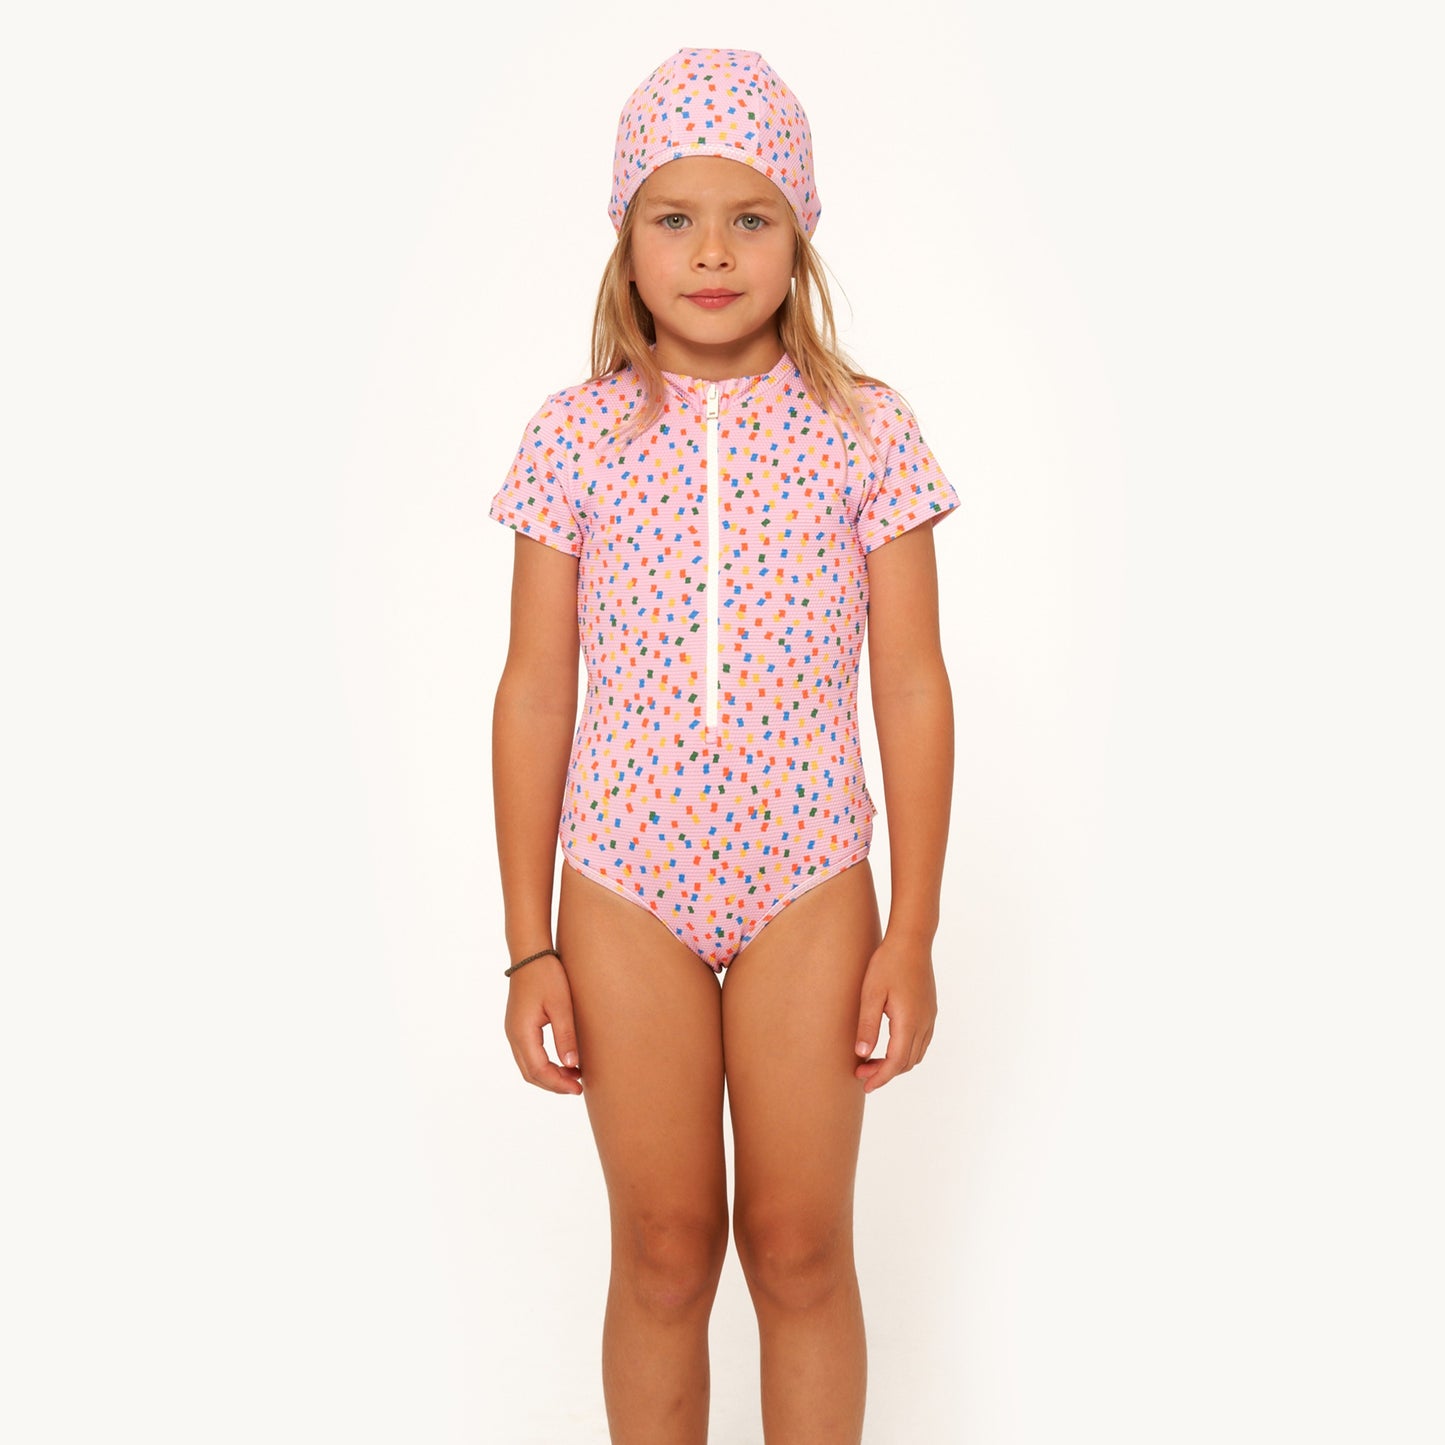 TINYCOTTONS Confetti SS One-Piece ALWAYS SHOW